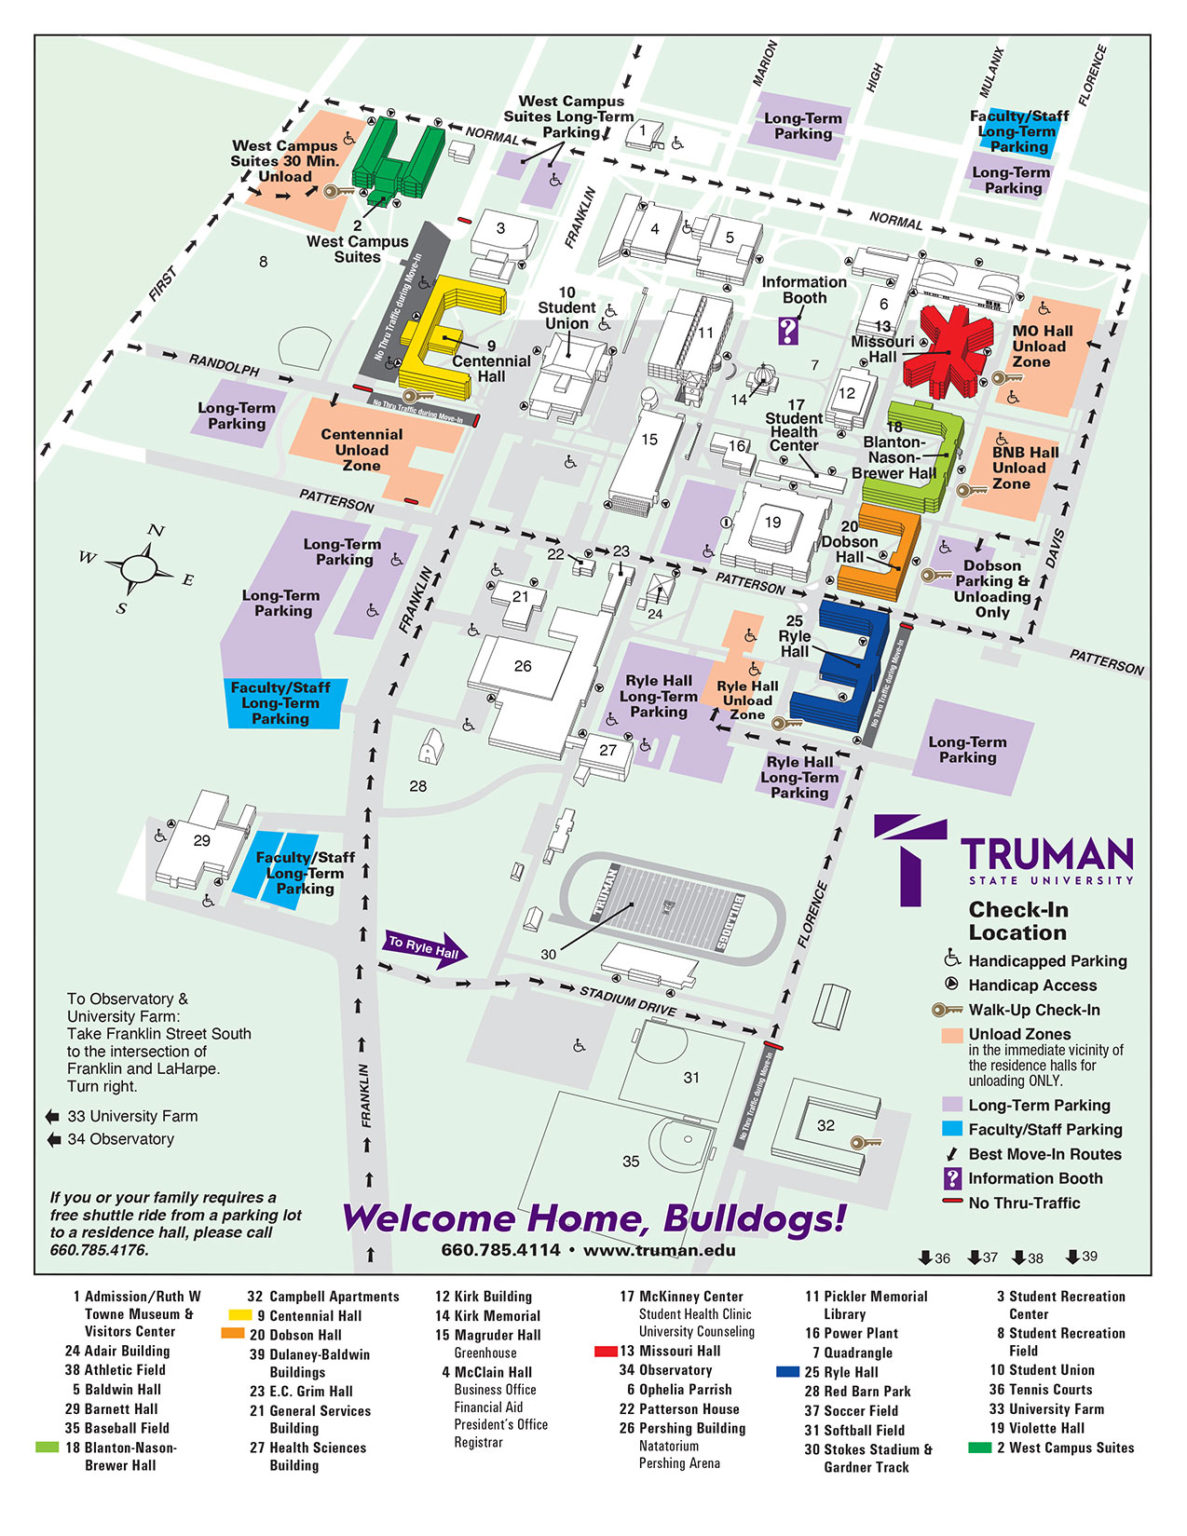 Parking and Unloading Map - Truman Days